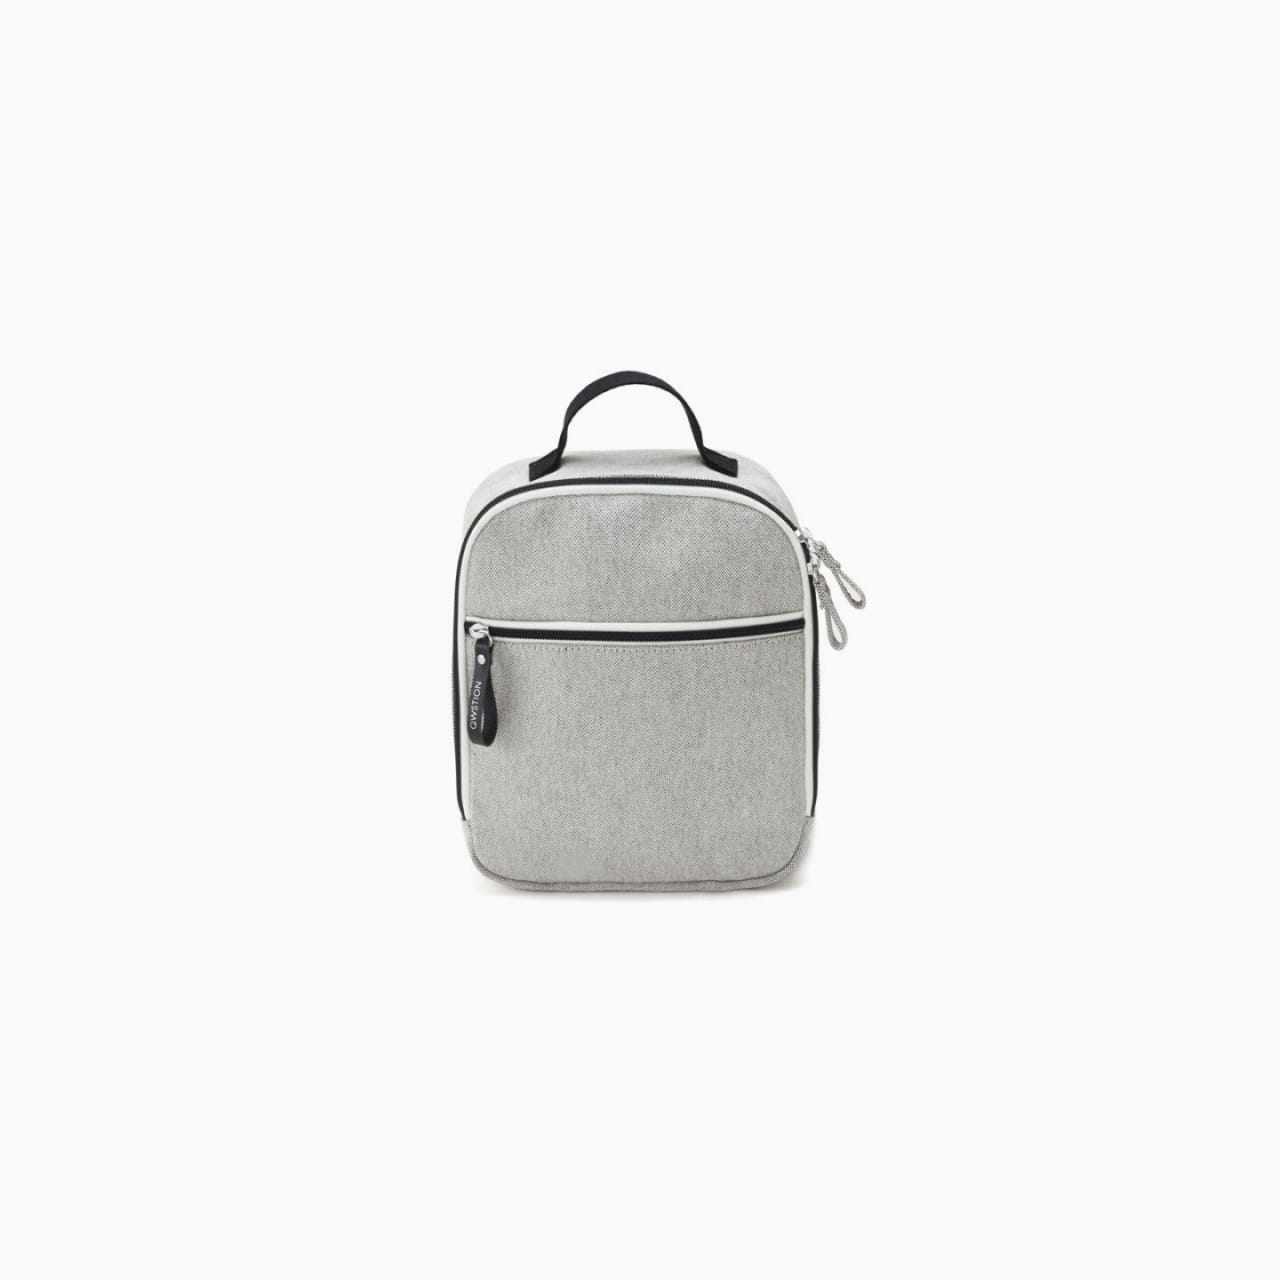 Light grey canvas backpack with black handle, zipper, and edge details.